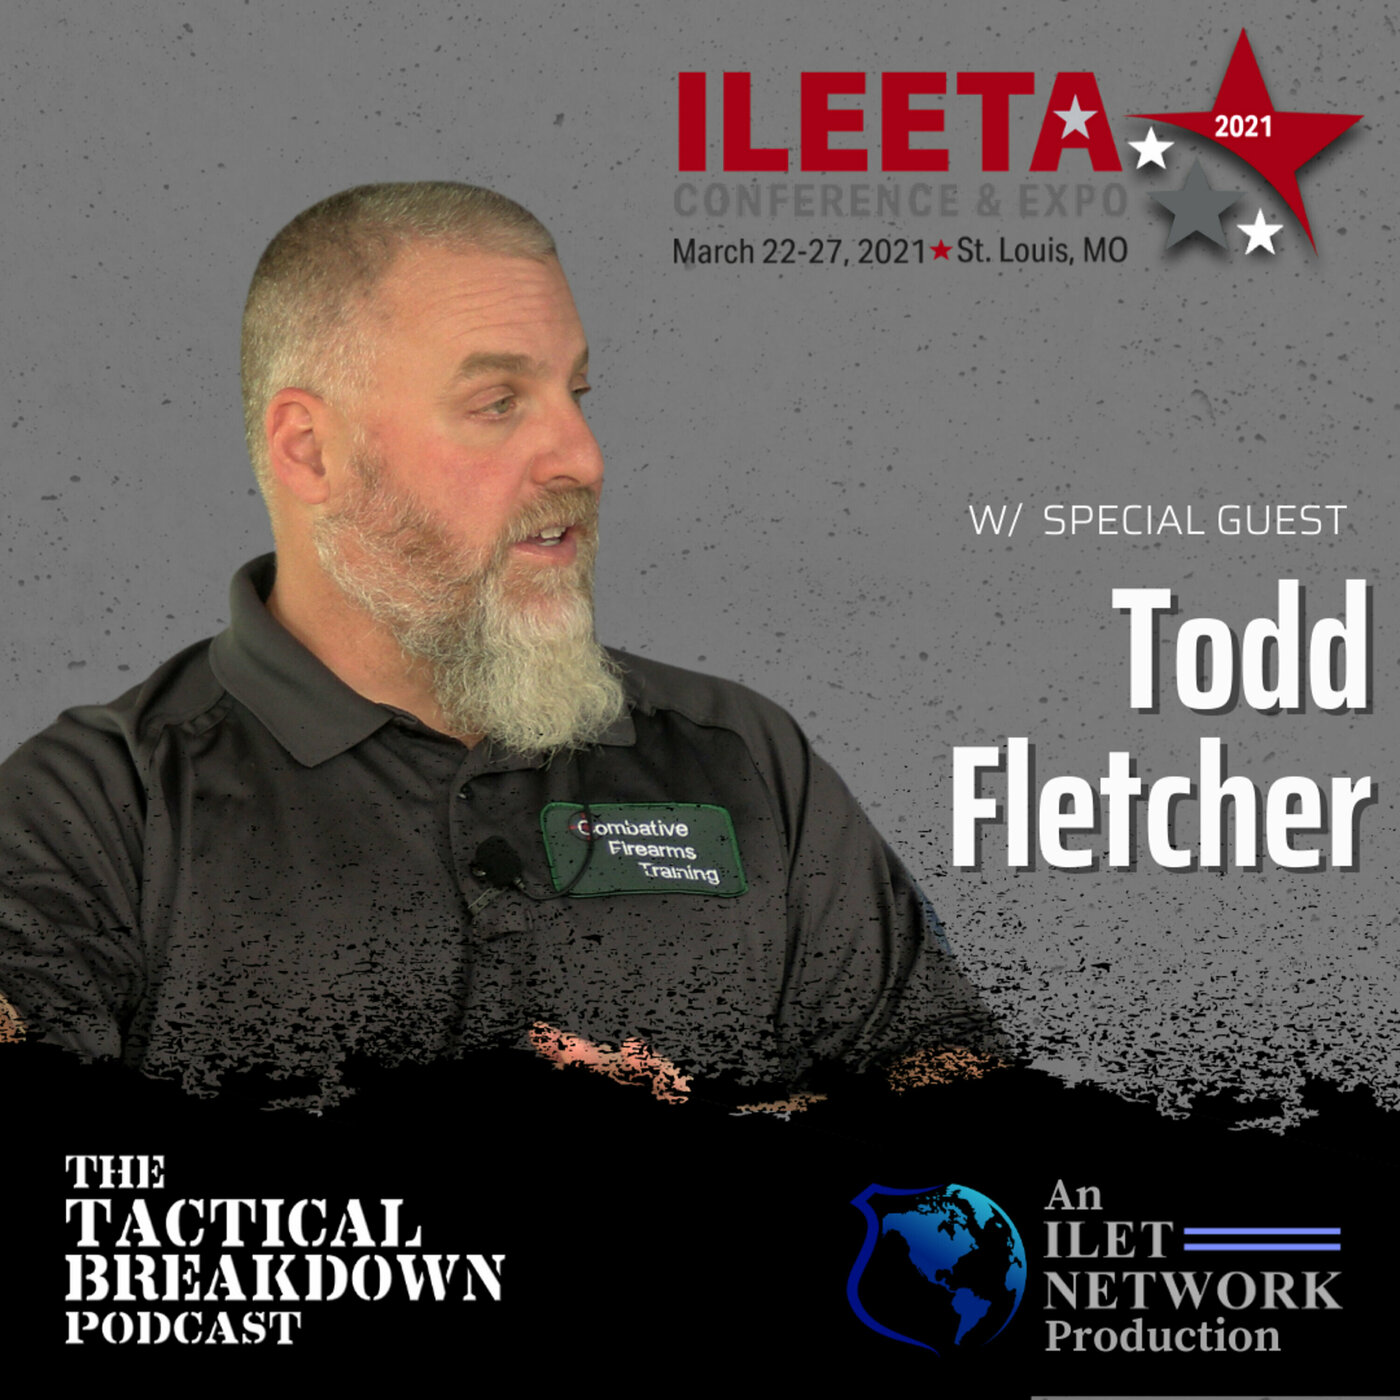 Todd Fletcher: Incorporating Fun & Games Into Training with a Purpose